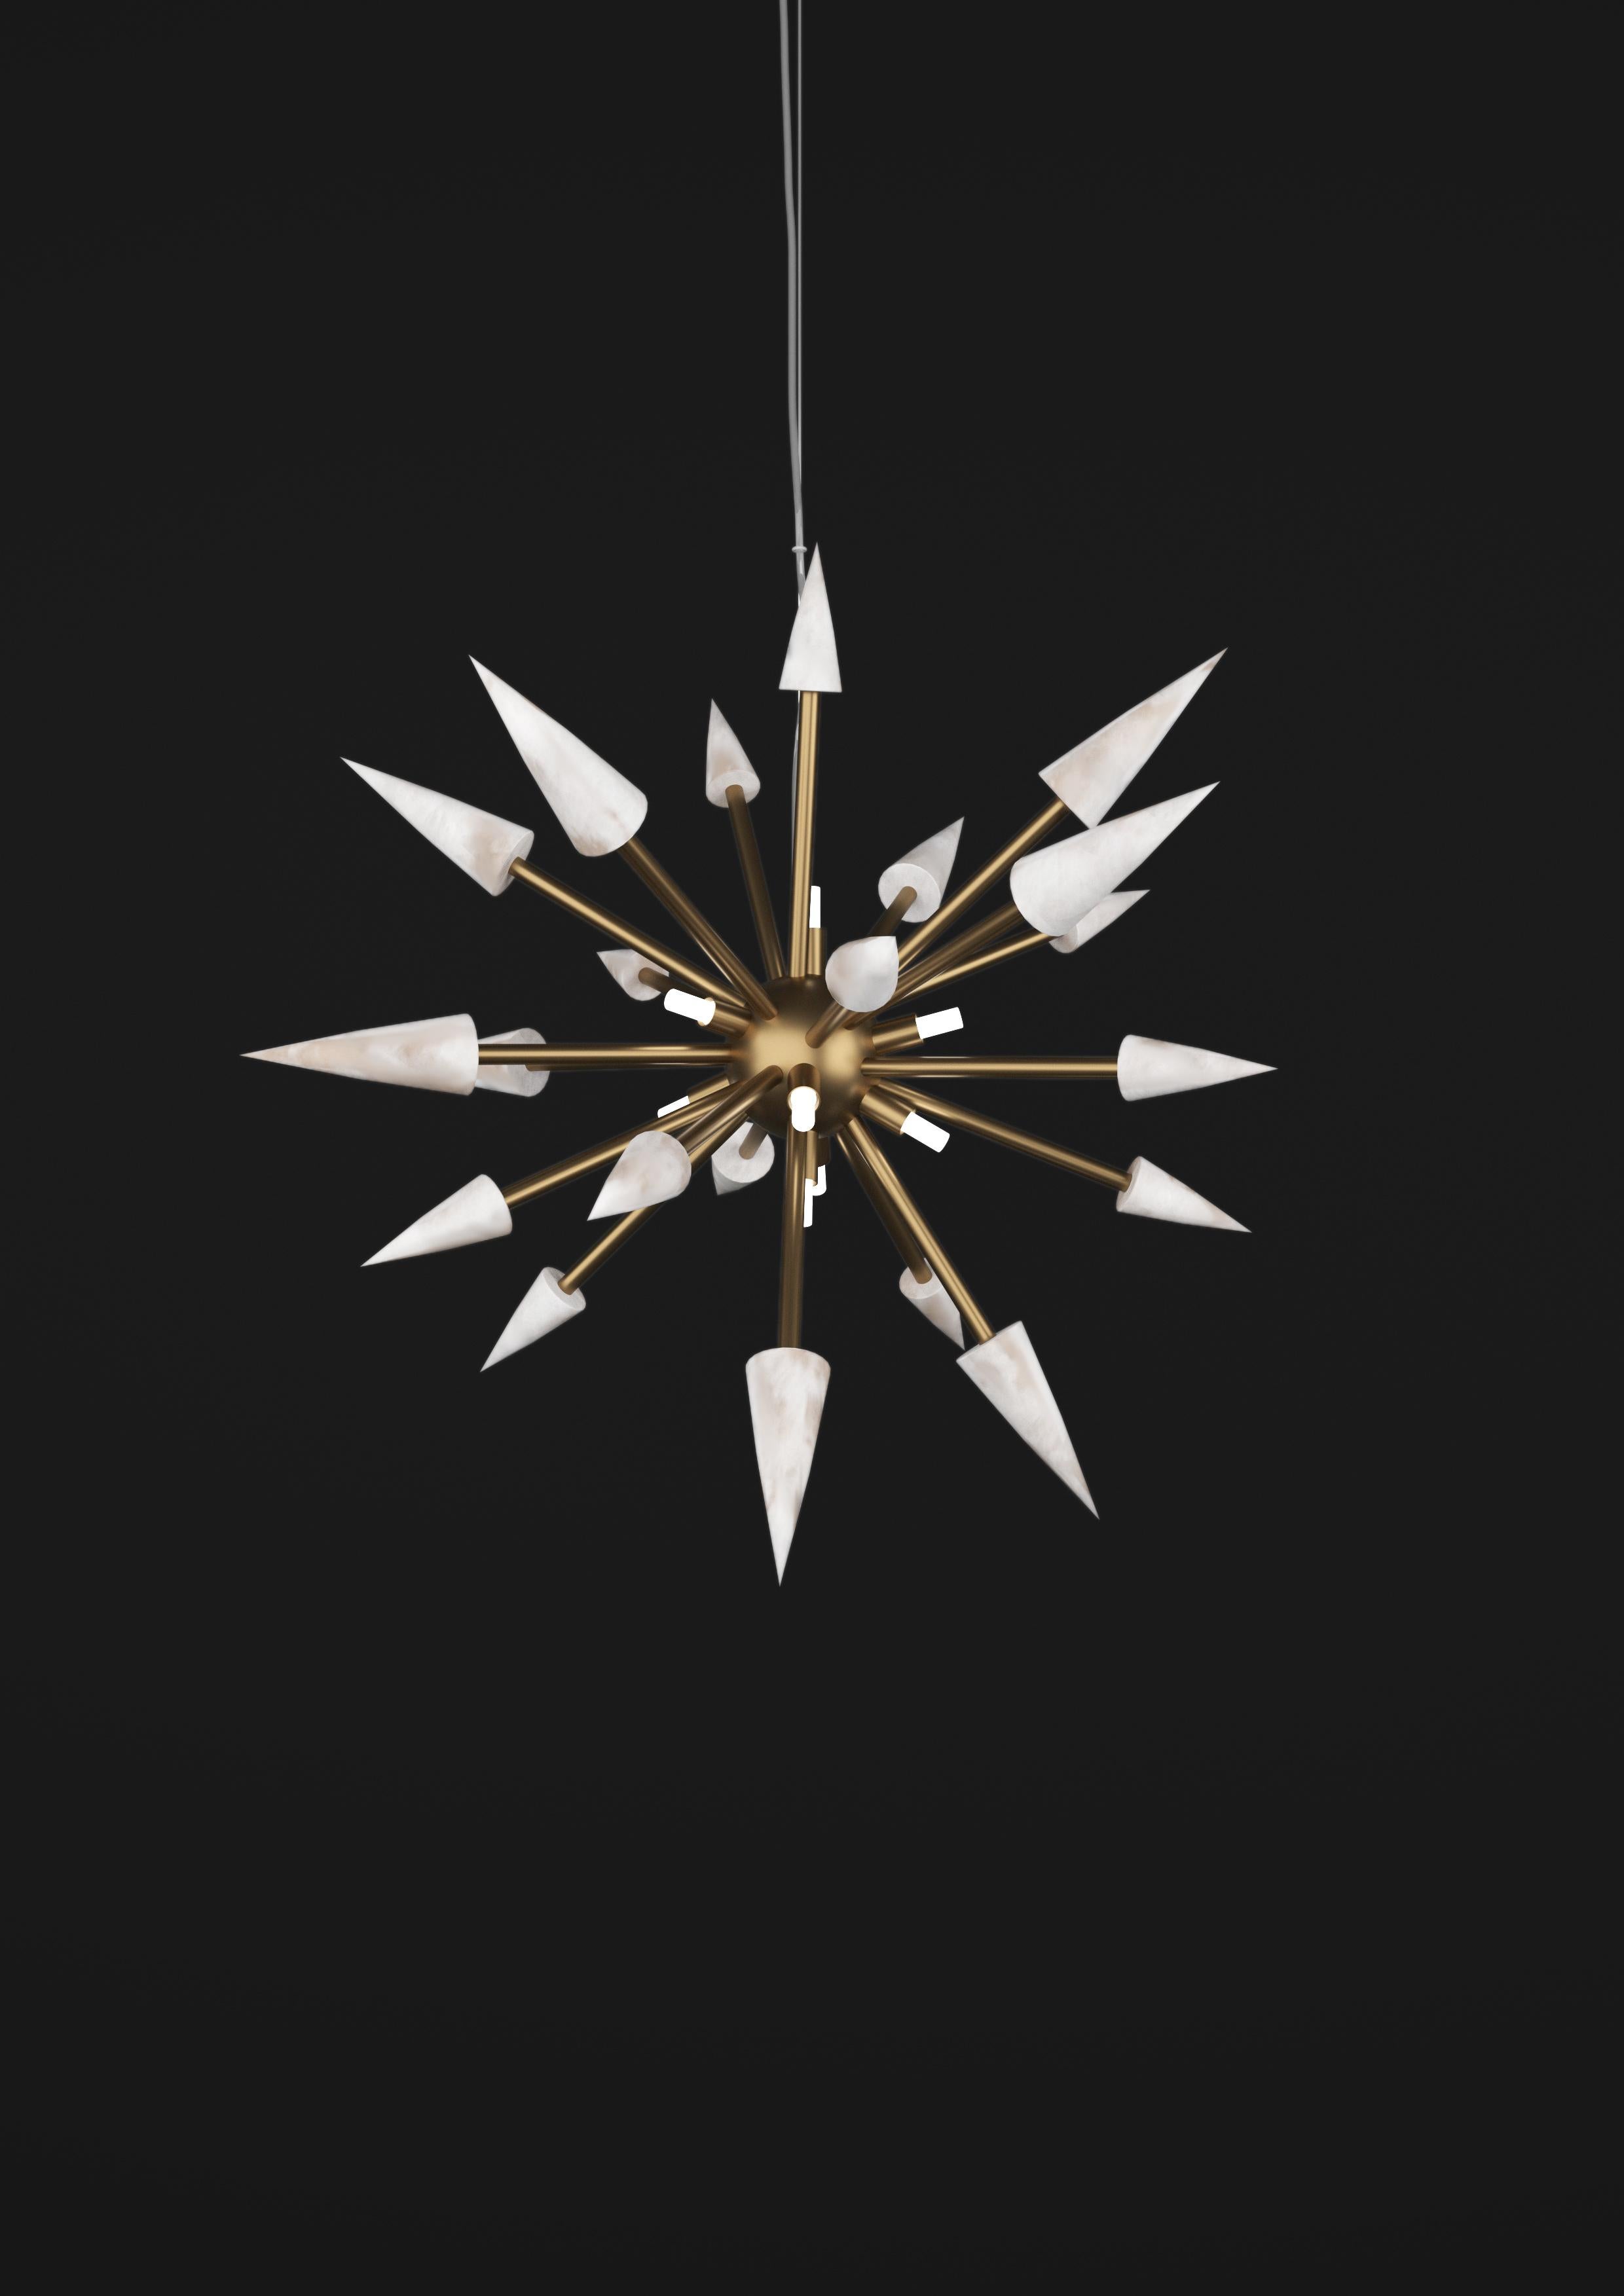 Perseo 50 Bronze Pendant Lamp by Alabastro Italiano
Dimensions: Ø 50 x H 300 cm.
Materials: White alabaster and bronze.

Available in different finishes: Shiny Silver, Bronze, Brushed Brass, Ruggine of Florence, Brushed Burnished, Shiny Gold,